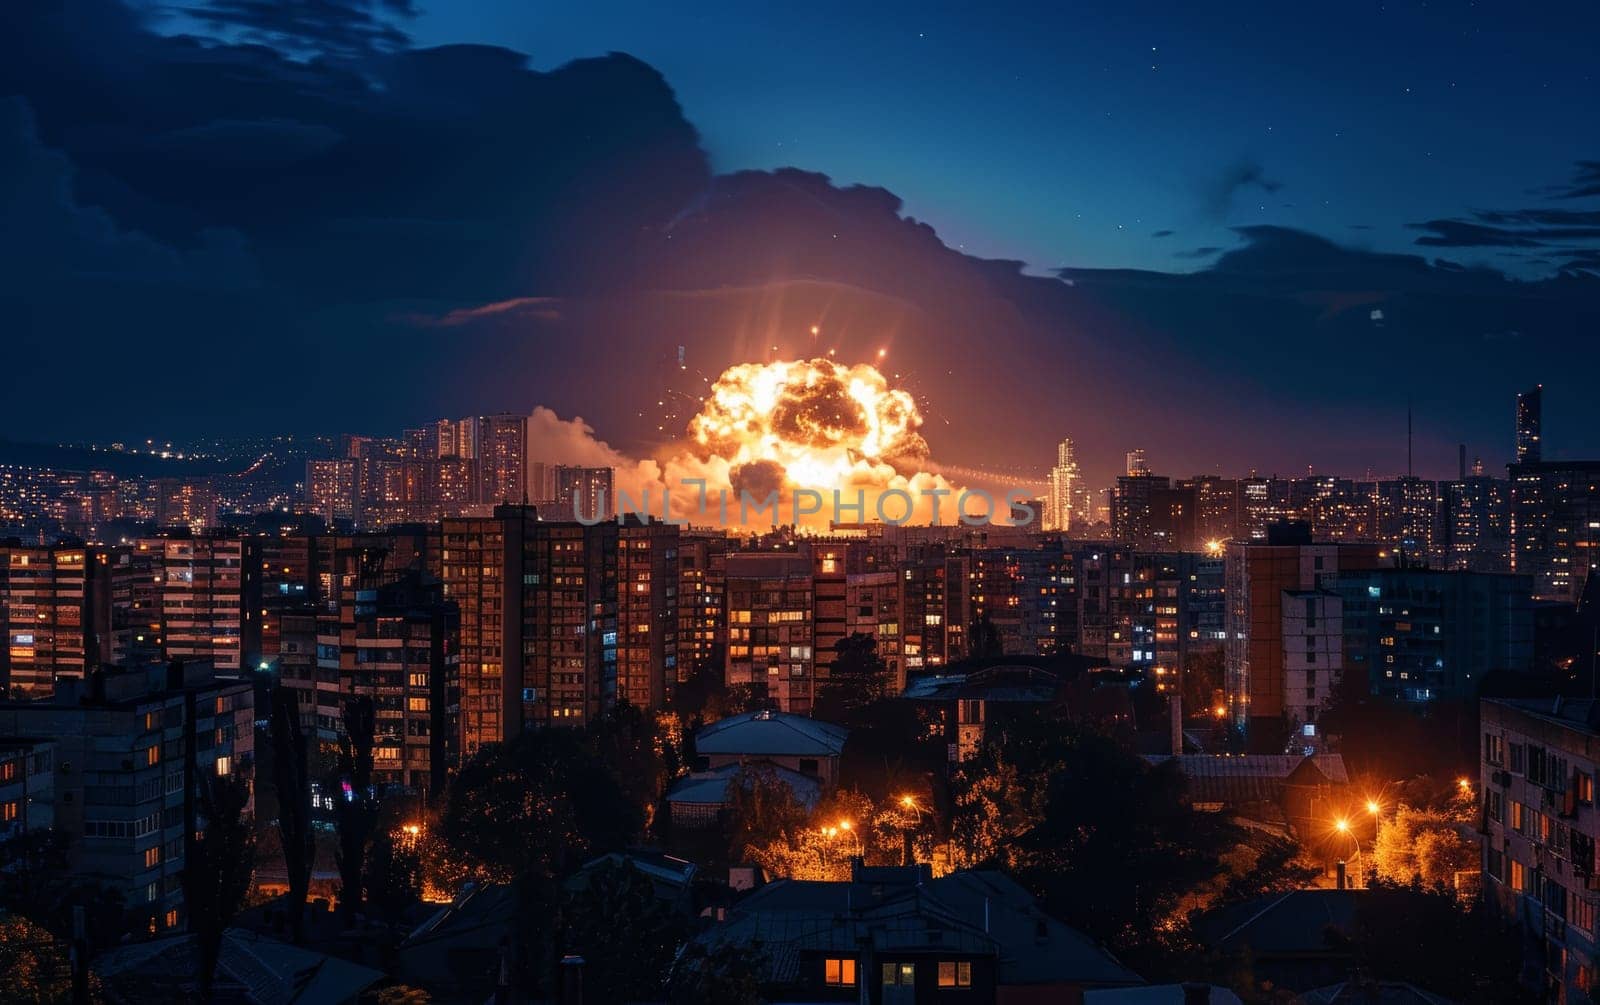 An explosion erupts in an urban environment at dusk, the fiery glow casting a haunting light over the city buildings, suggesting urgency and danger.